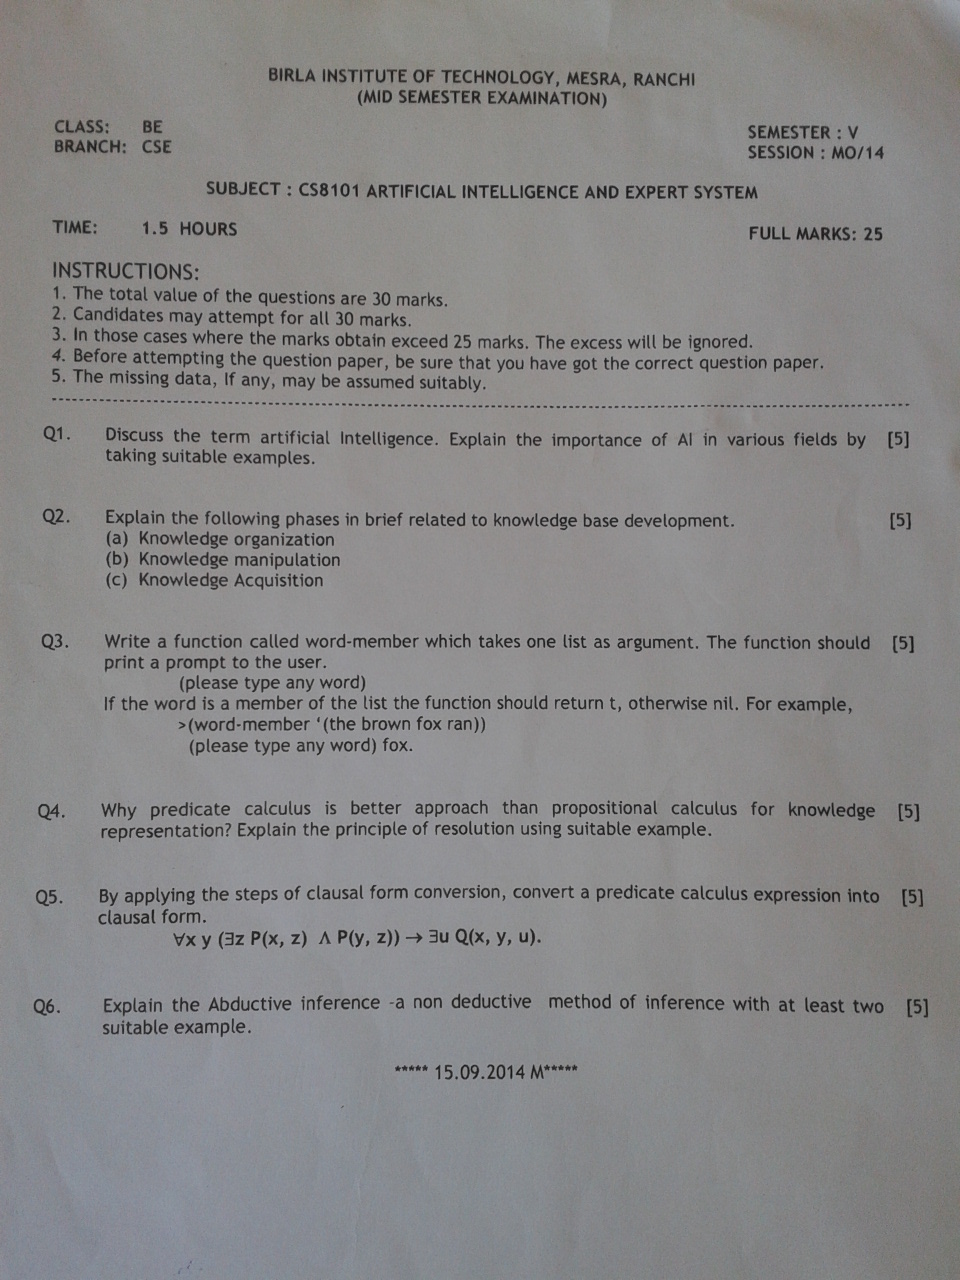 Artificial Intelligence and Expert System Question Paper-1545_FYfrGP.jpg